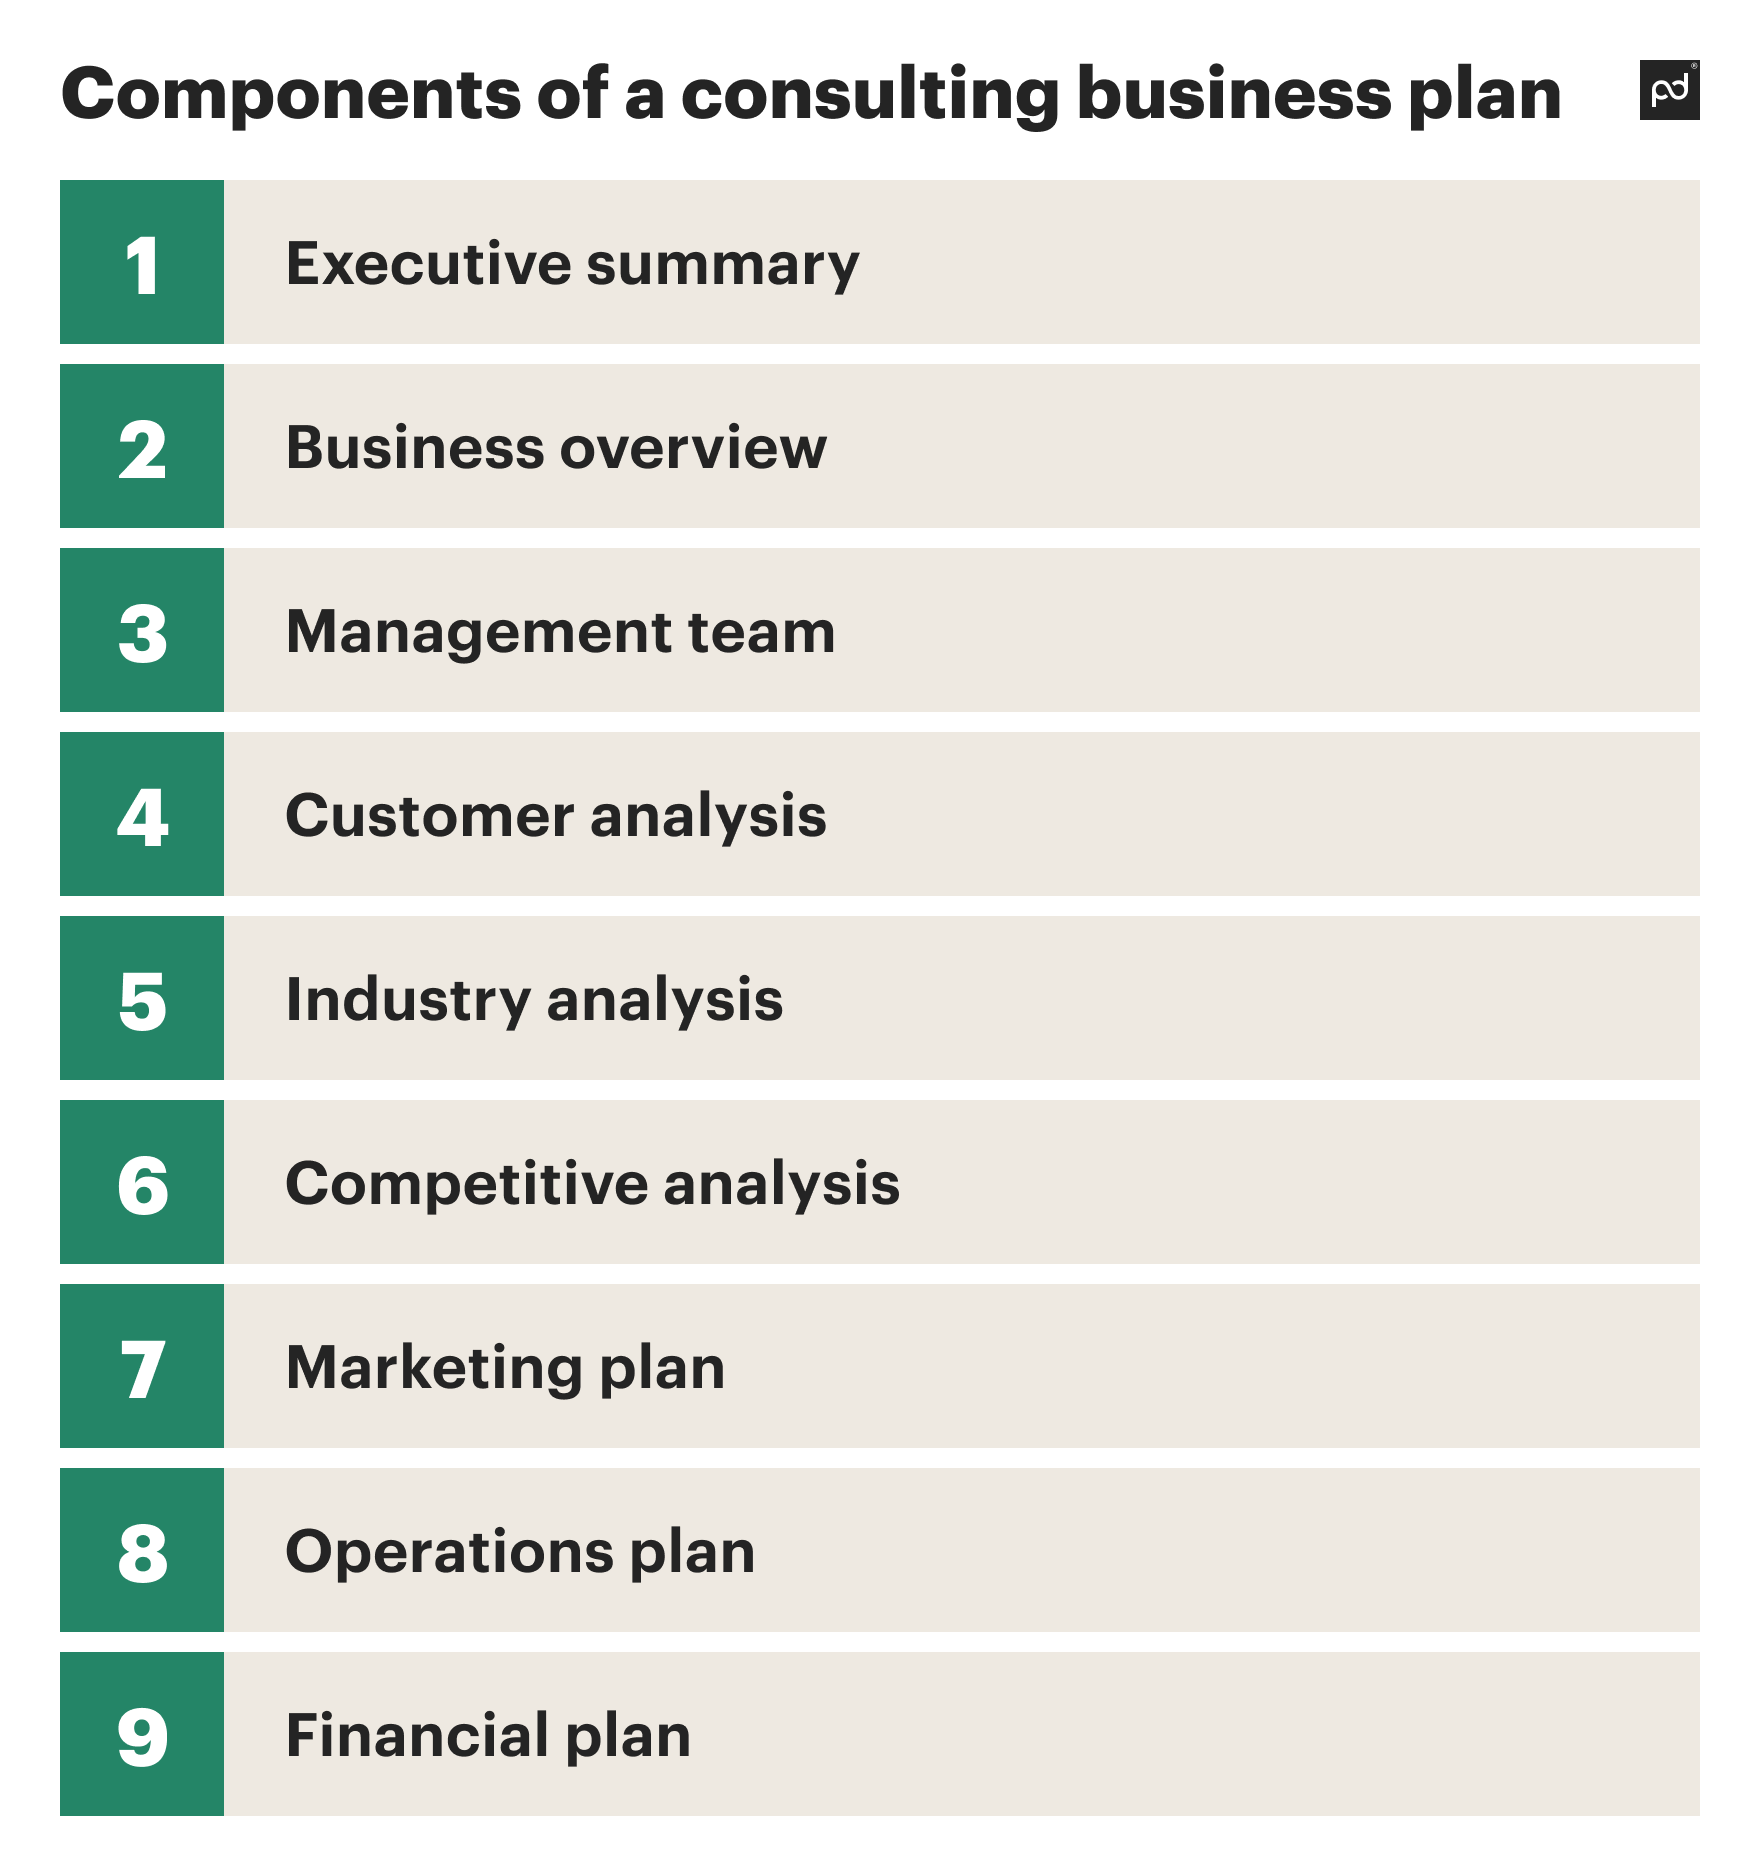 Components of a consulting business plan